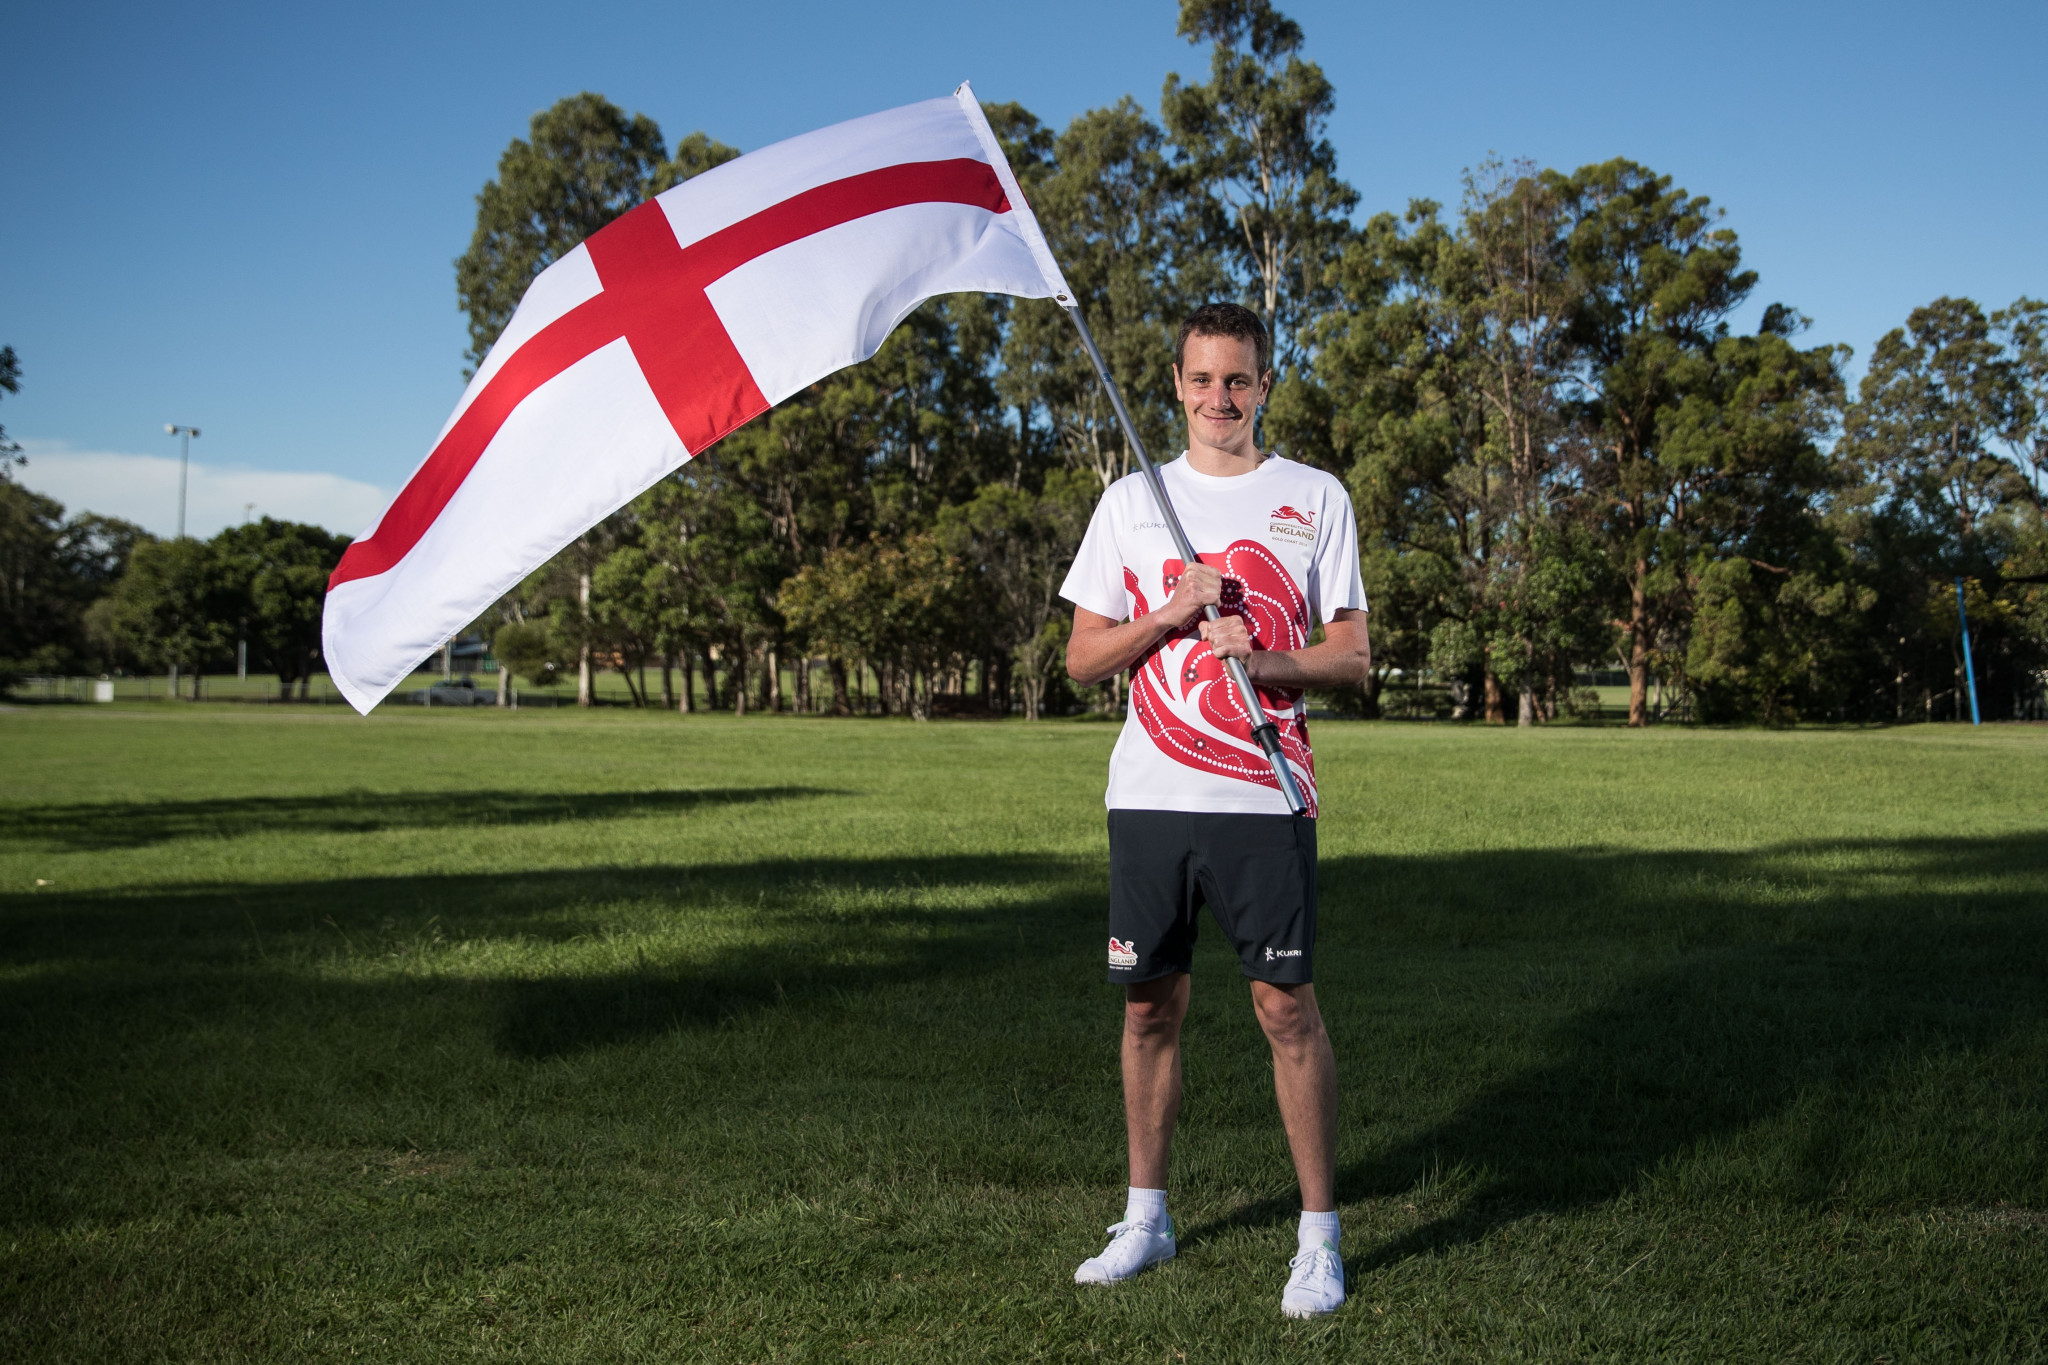 Alistair Brownlee has been named as England’s flagbearer for tomorrow’s Opening Ceremony of the Gold Coast 2018 Commonwealth Games ©Getty Images